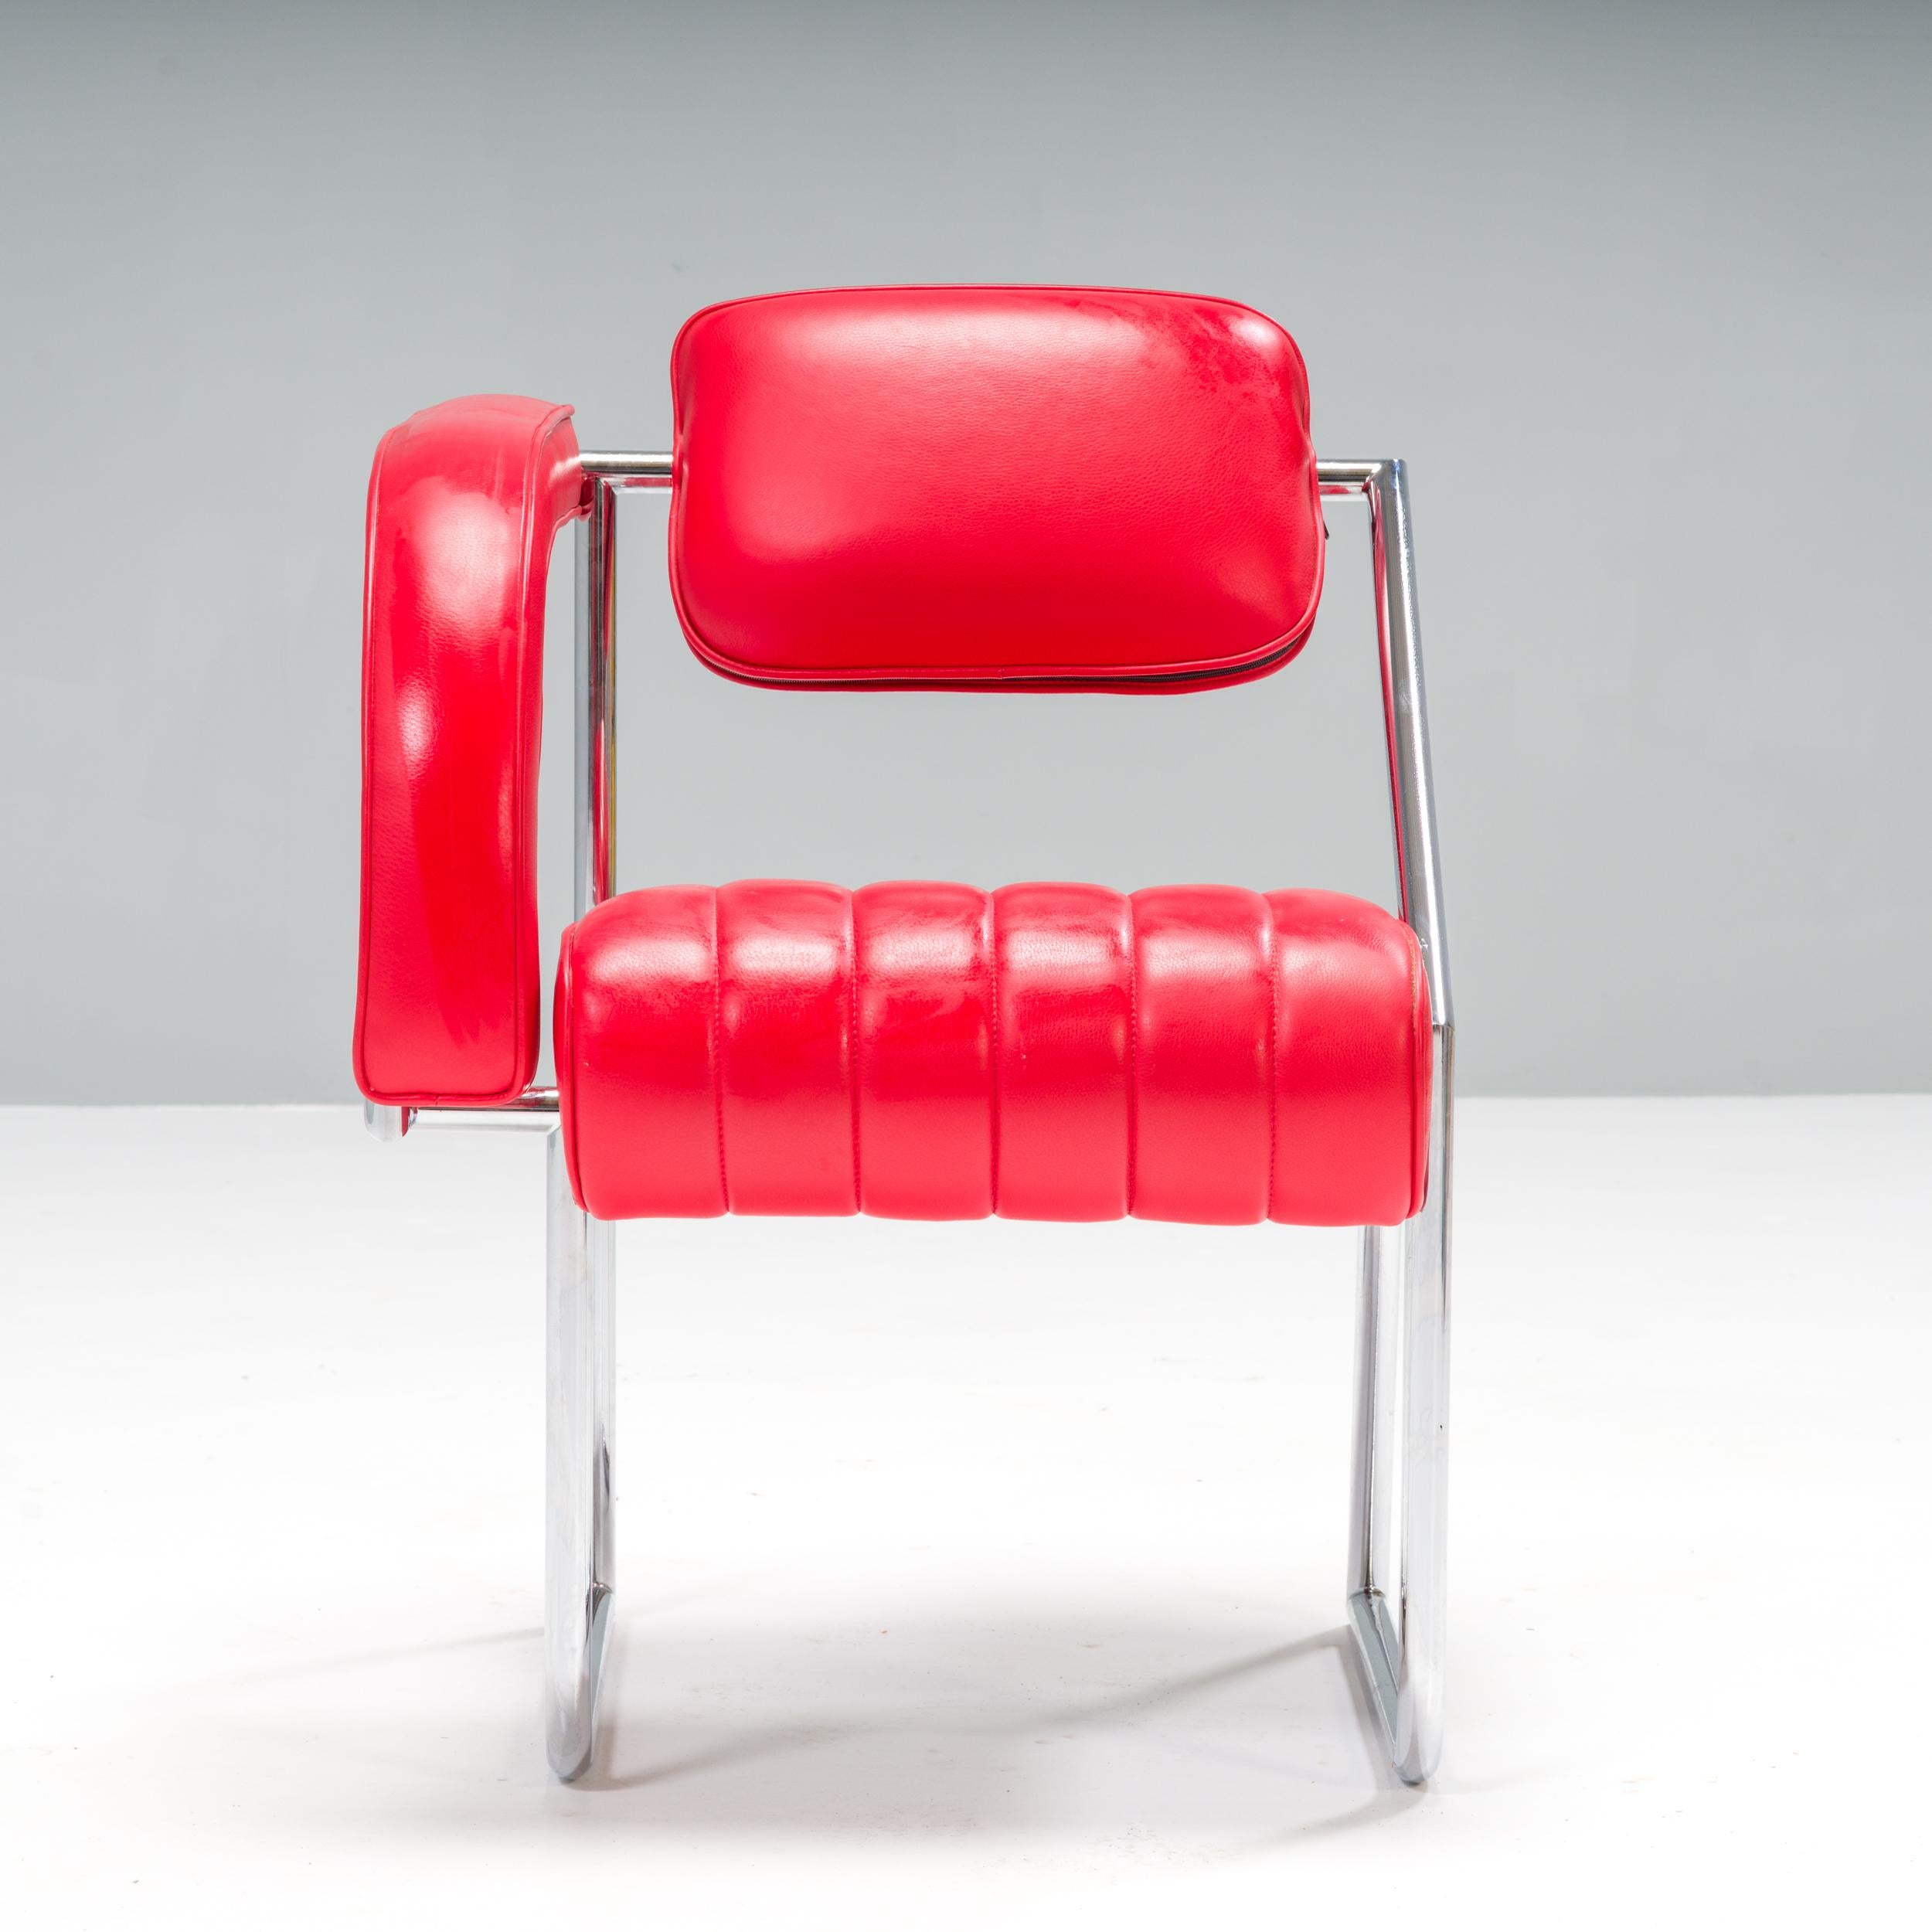 Originally designed by Eileen Gray in 1926 and manufactured in 2006, the Non Conformist chair is a fantastic example of her pioneering modernist design.

The asymmetric frame is constructed from chrome-plated tubular steel, with a mix of angular